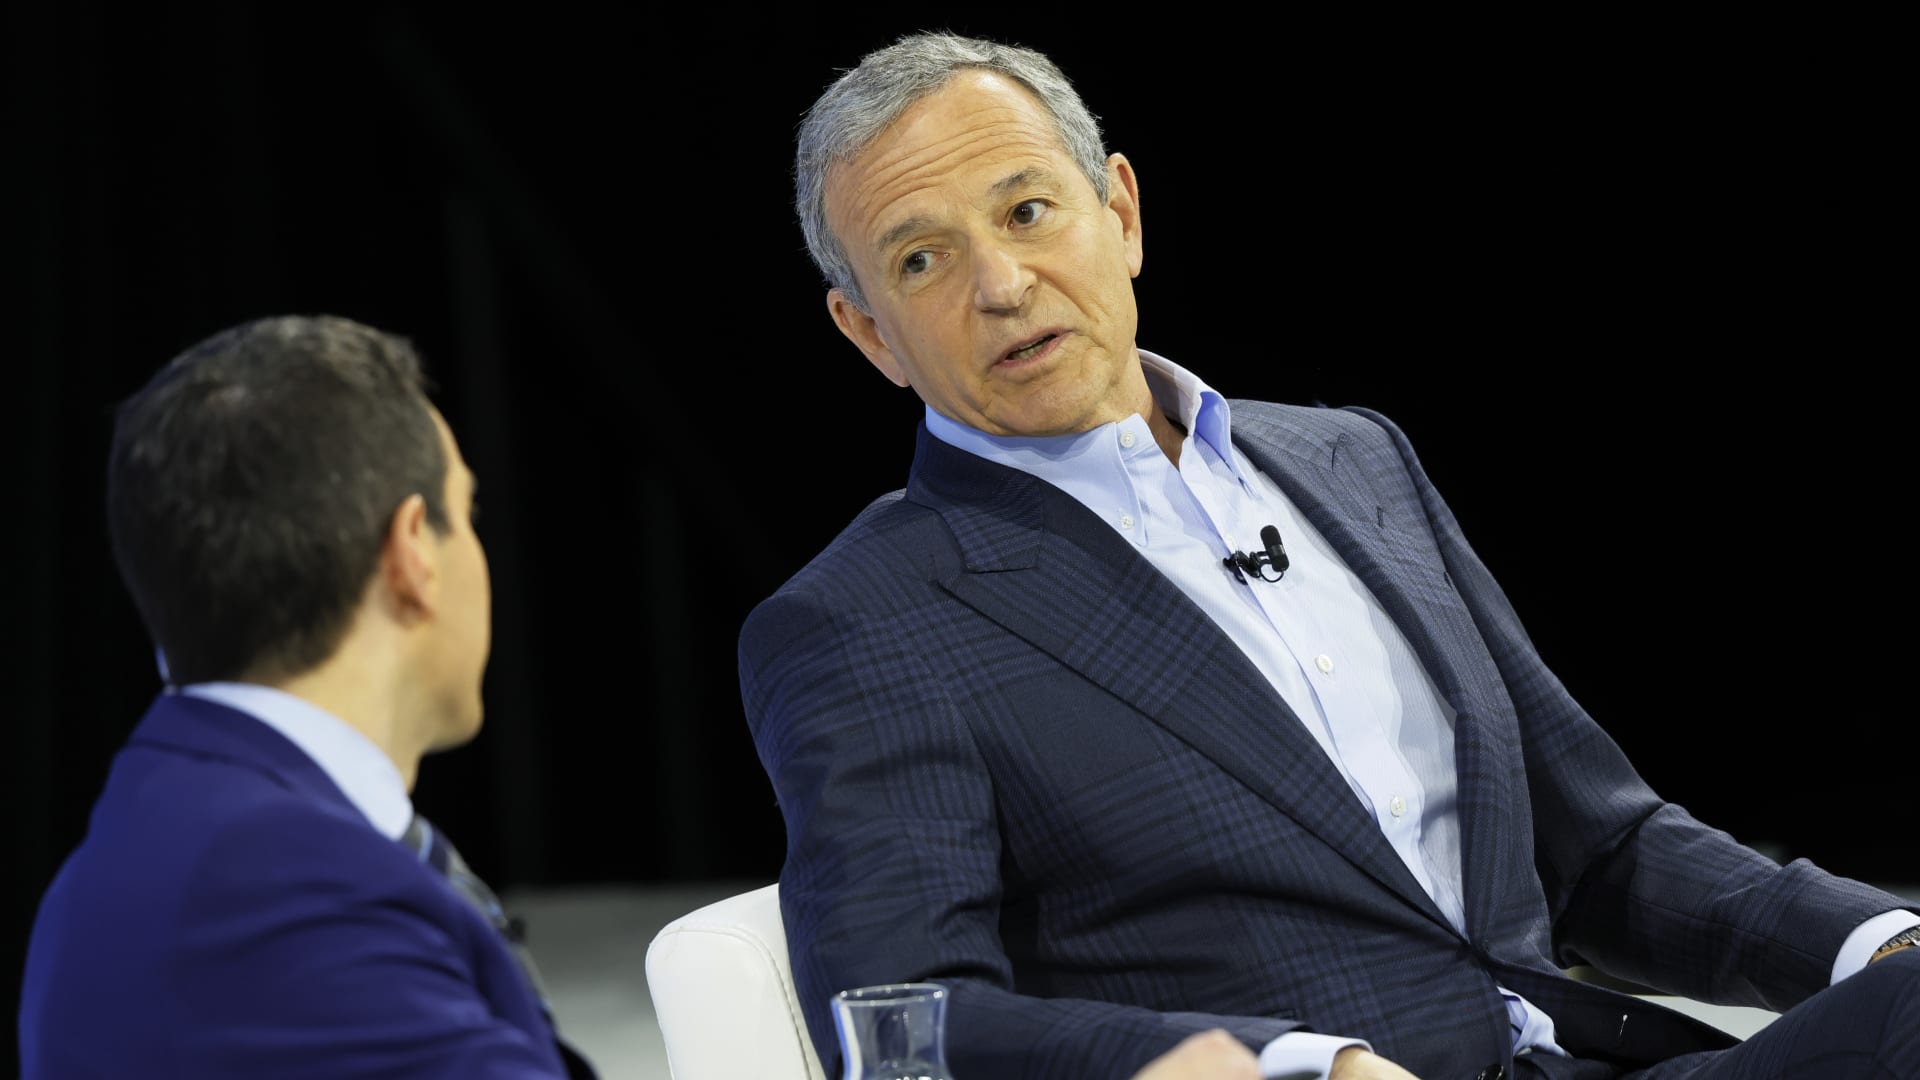 Disney CEO Bob Iger says company’s movies have been too focused on messaging